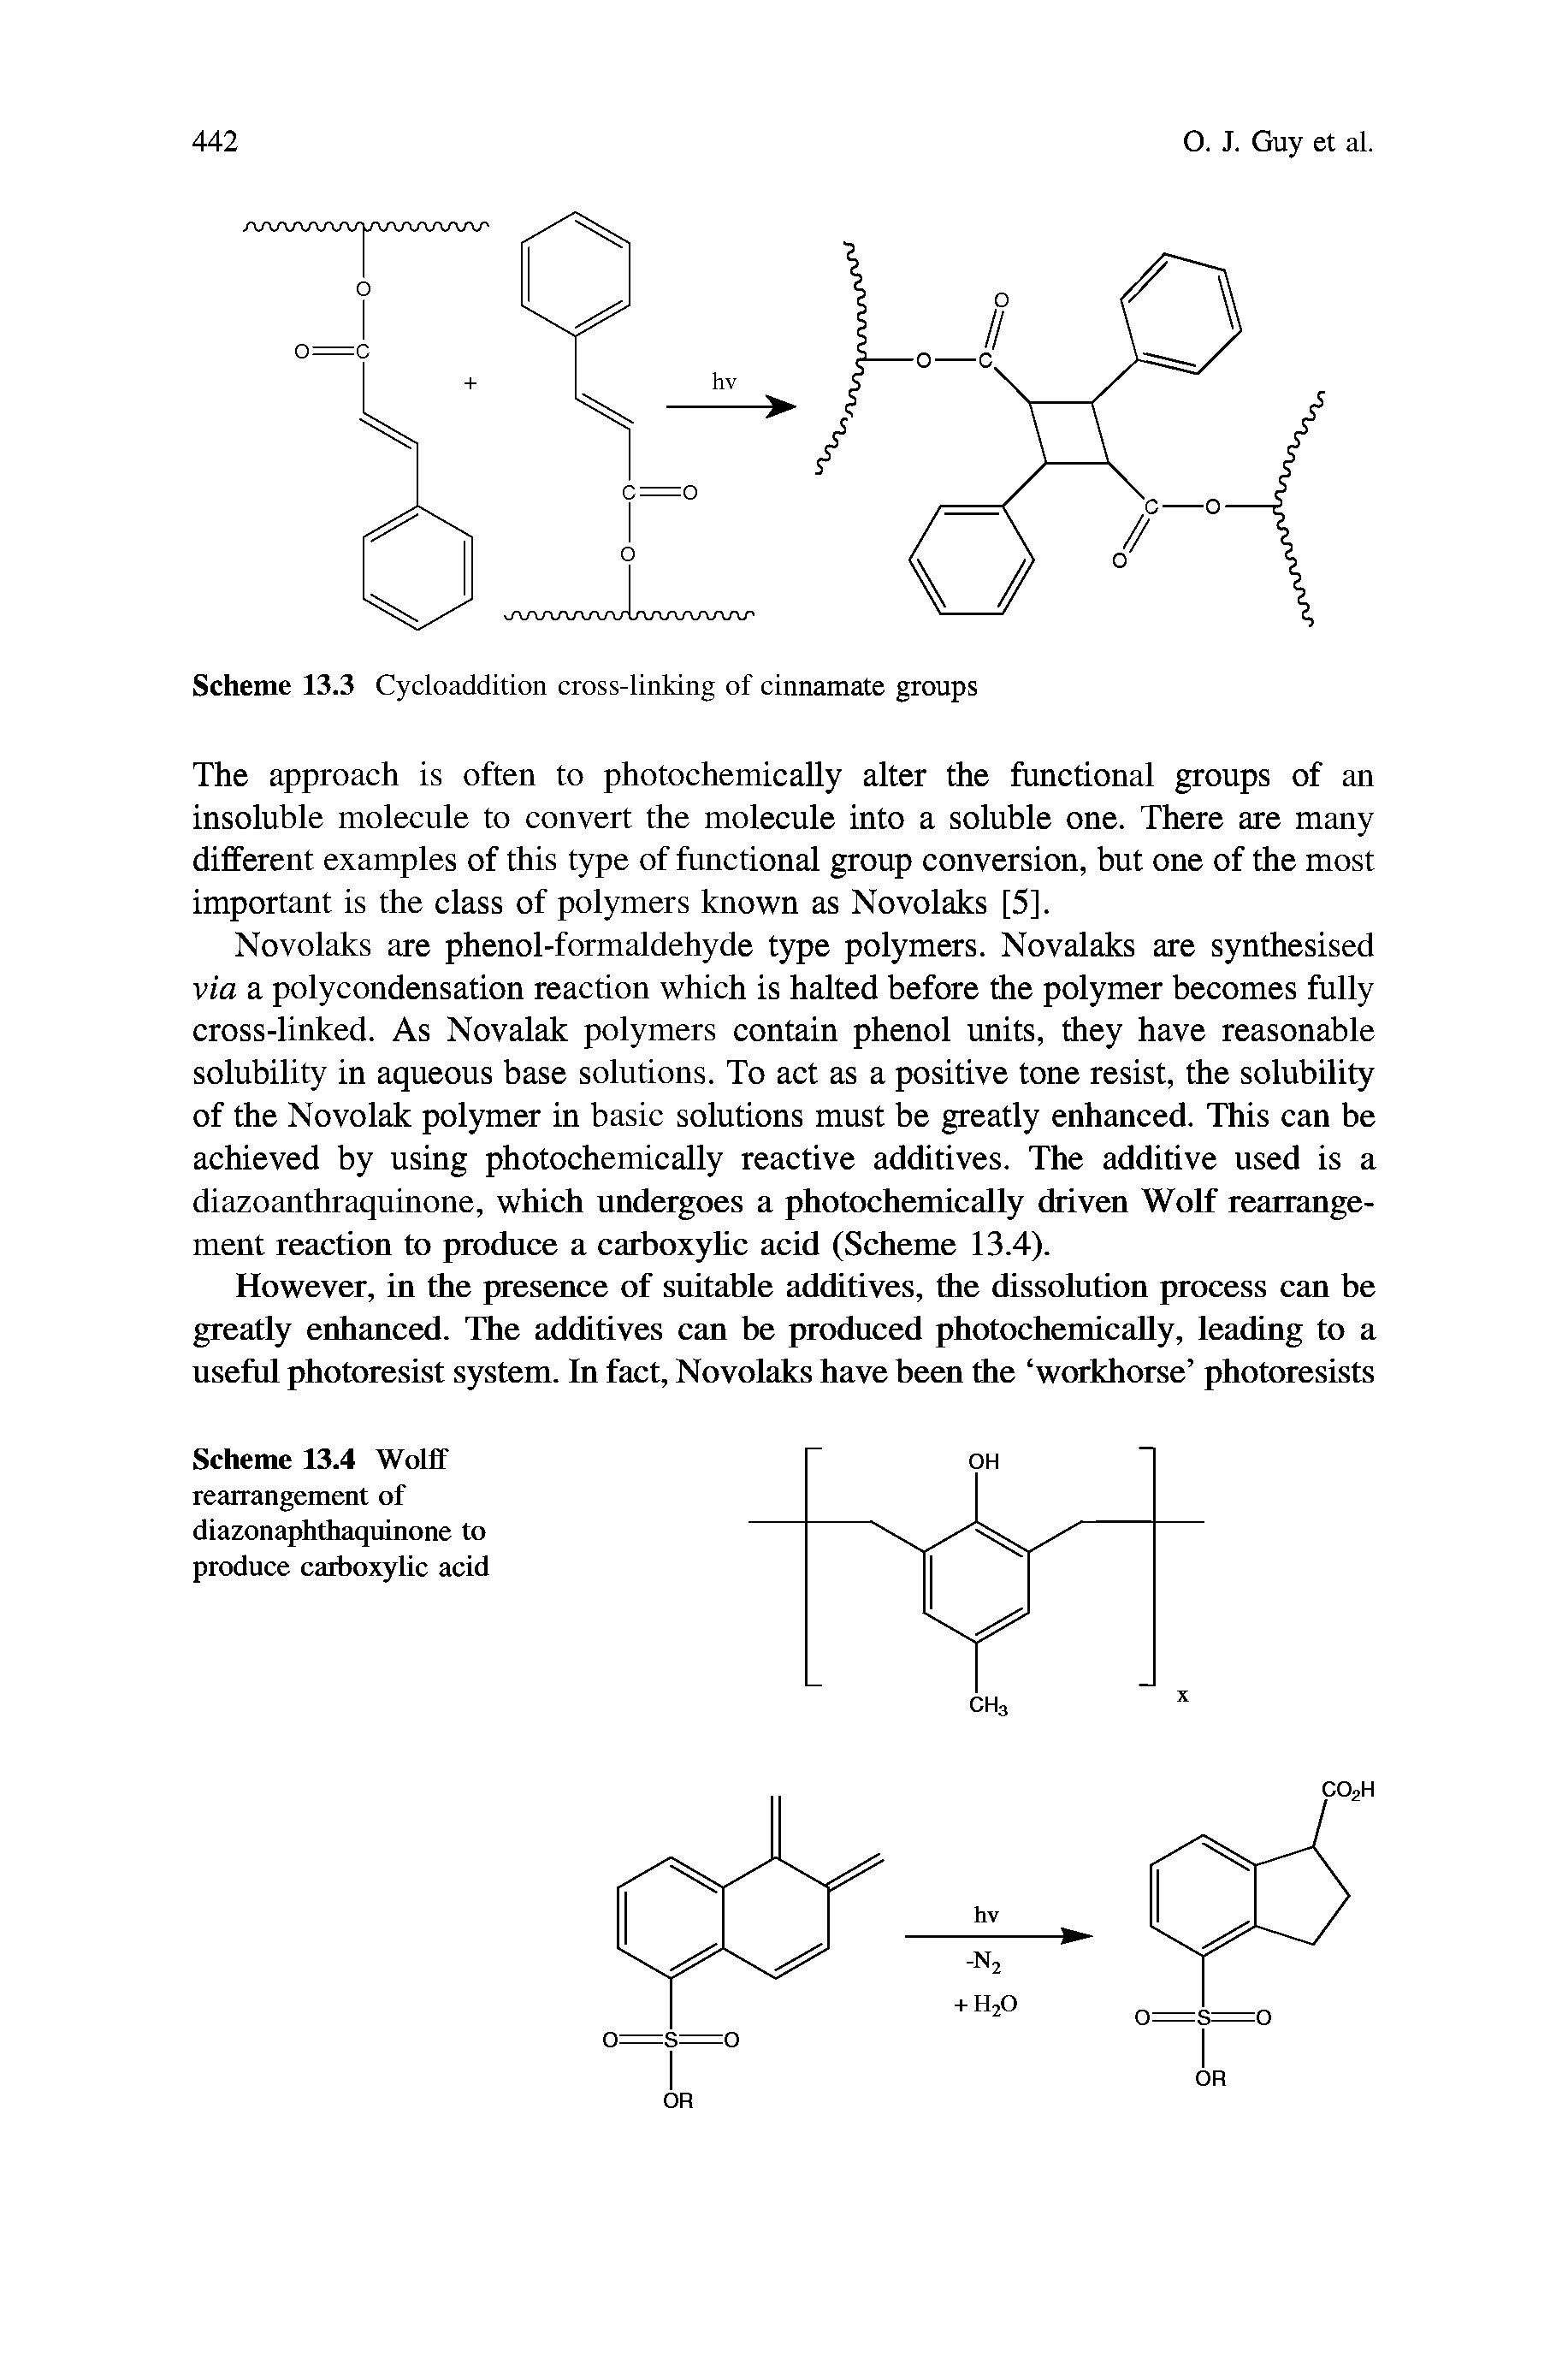 Scheme 13.3 Cycloaddition cross-linking of cinnamate groups...